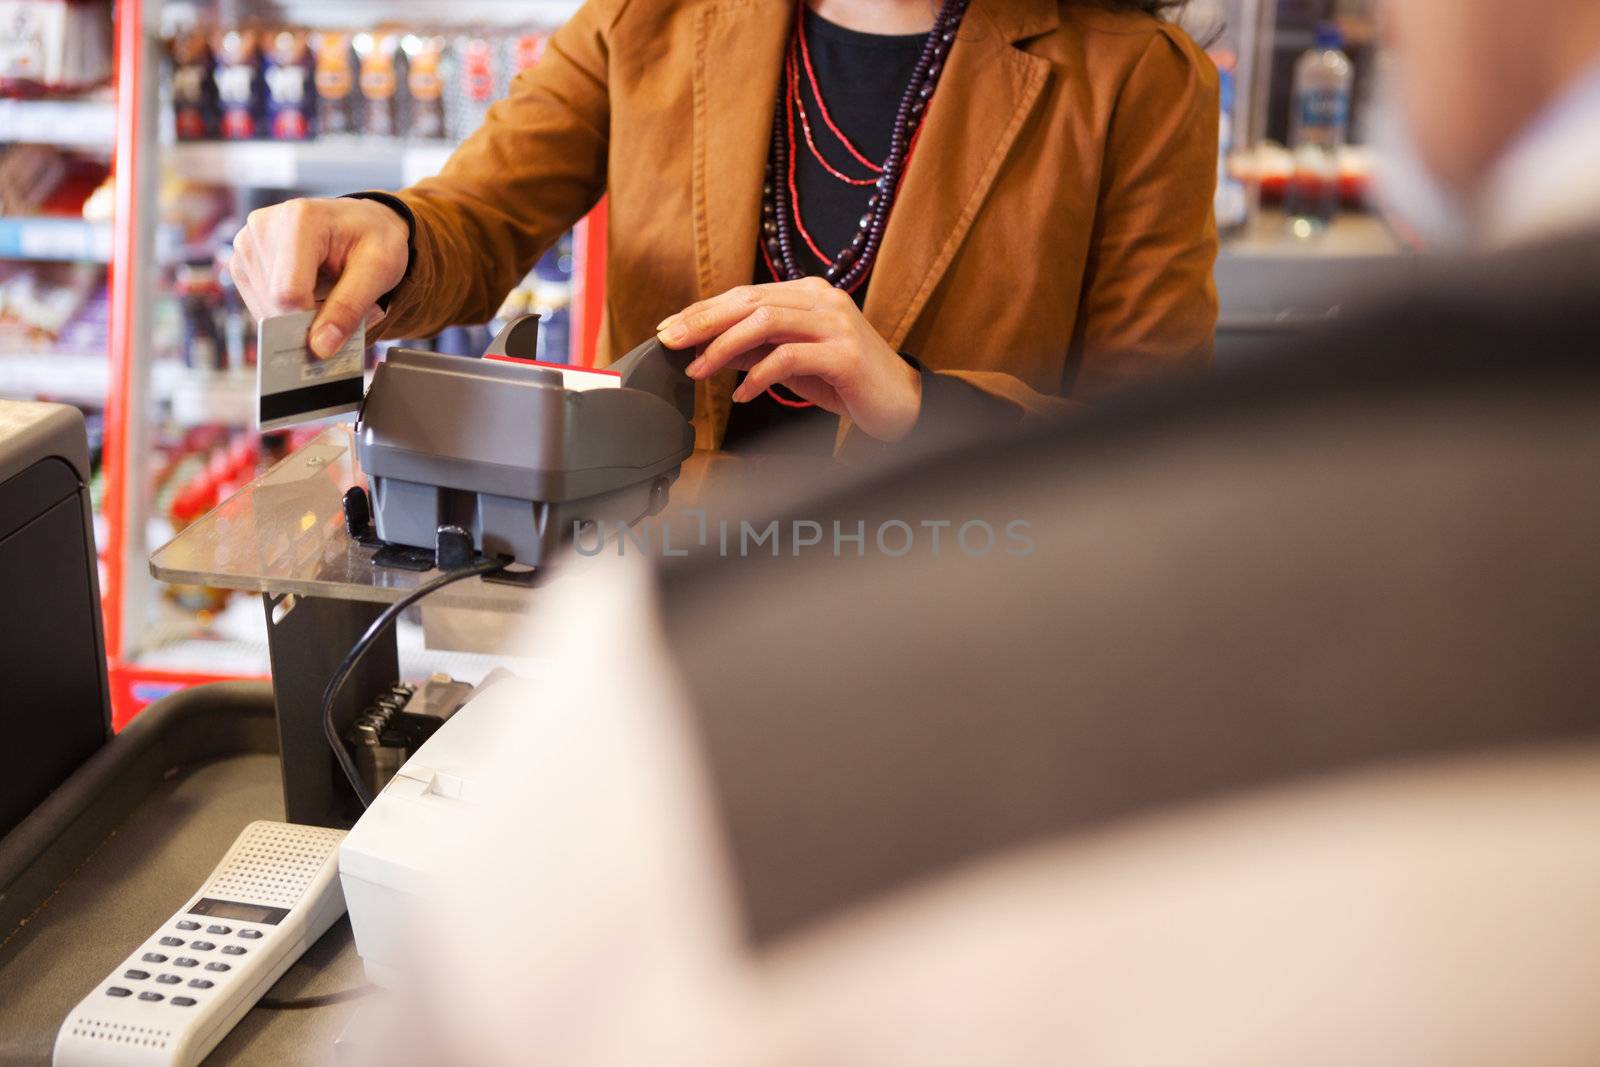 Shop assistant swiping credit card in supermarket with customer in the foreground